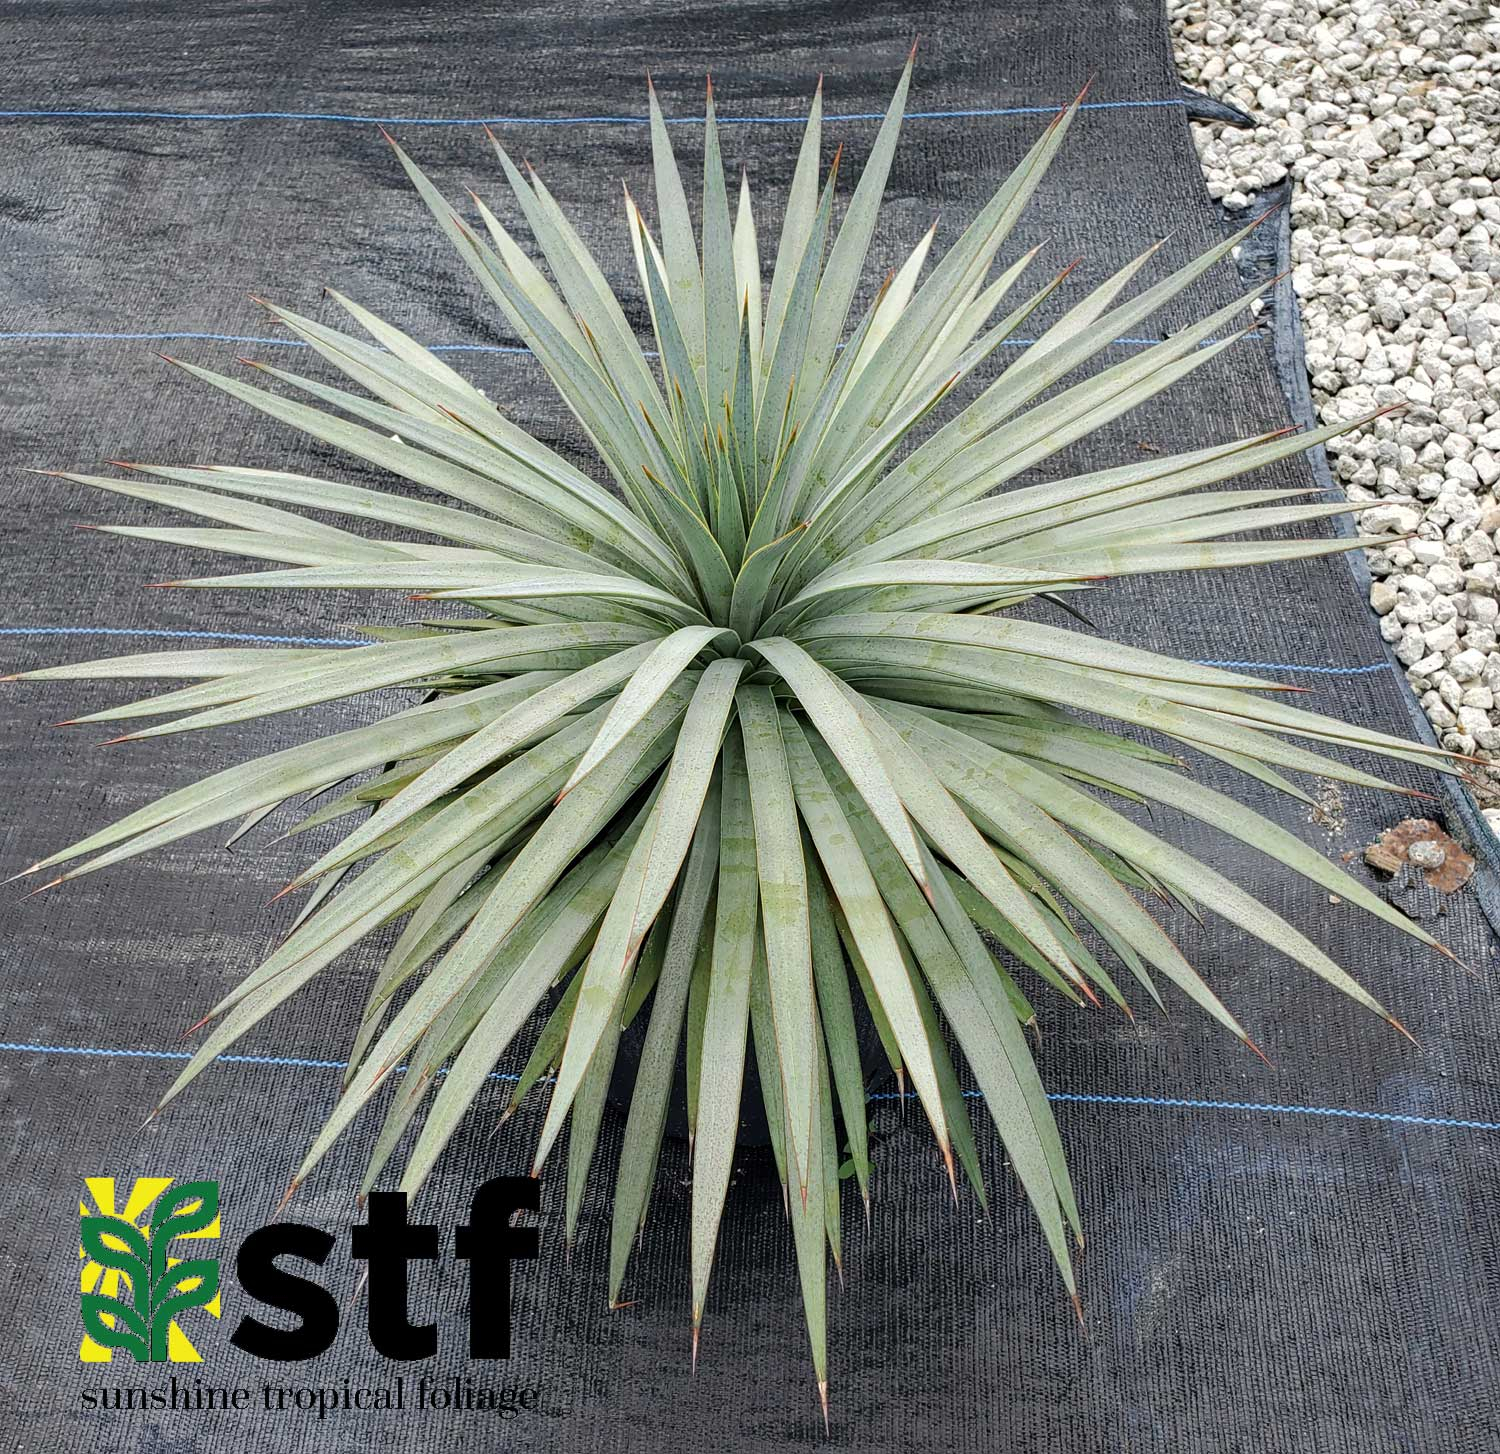 Details about   "Man of Steel" Mangave STARTER Plant Agave & Manfreda Hybrid Steely Thin Leaves 